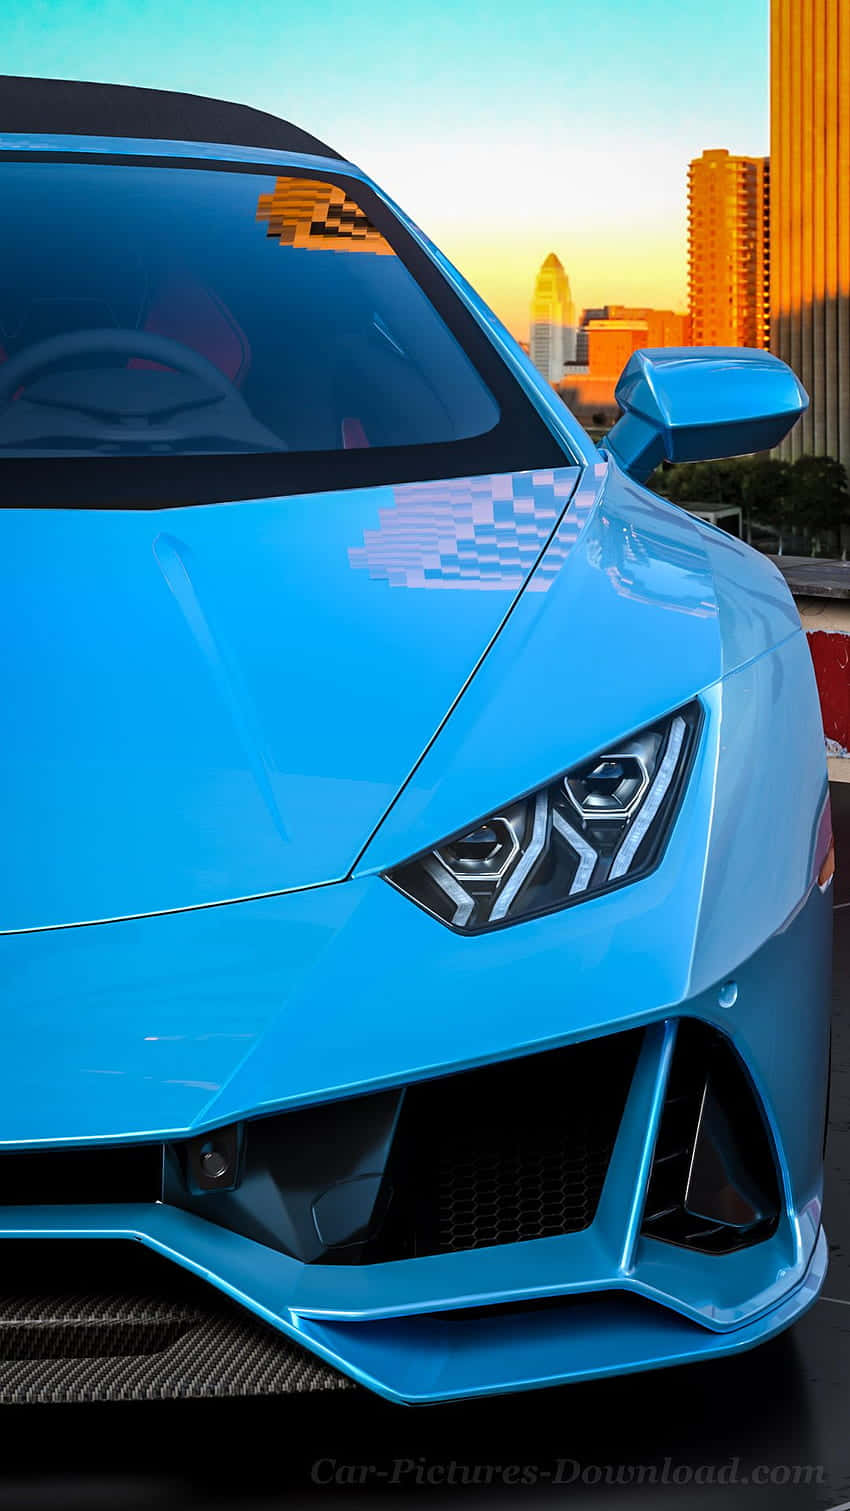 Speed and style, the Pixel 3xl Lamborghini.